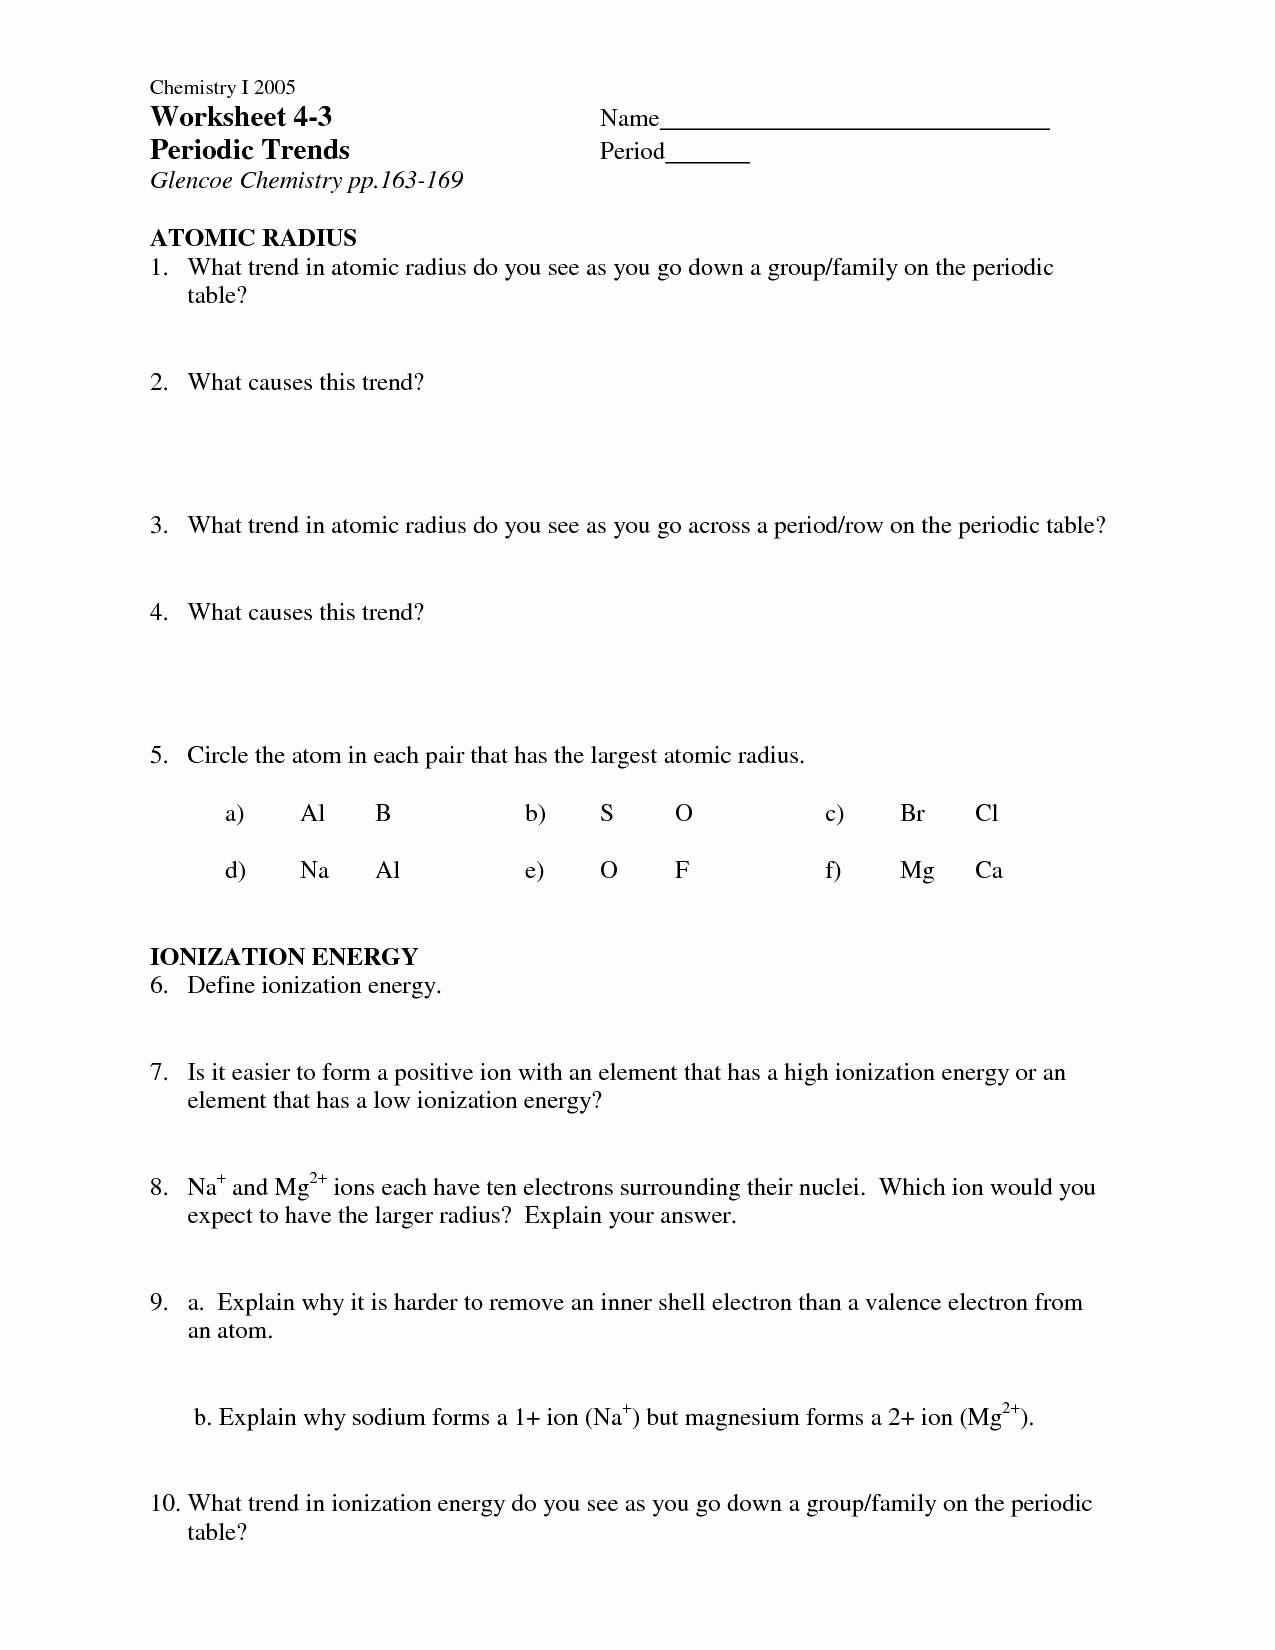 Periodic Trends Worksheet Answer Key Unique 20 Best Of Periodic Trends Worksheet Answers Key